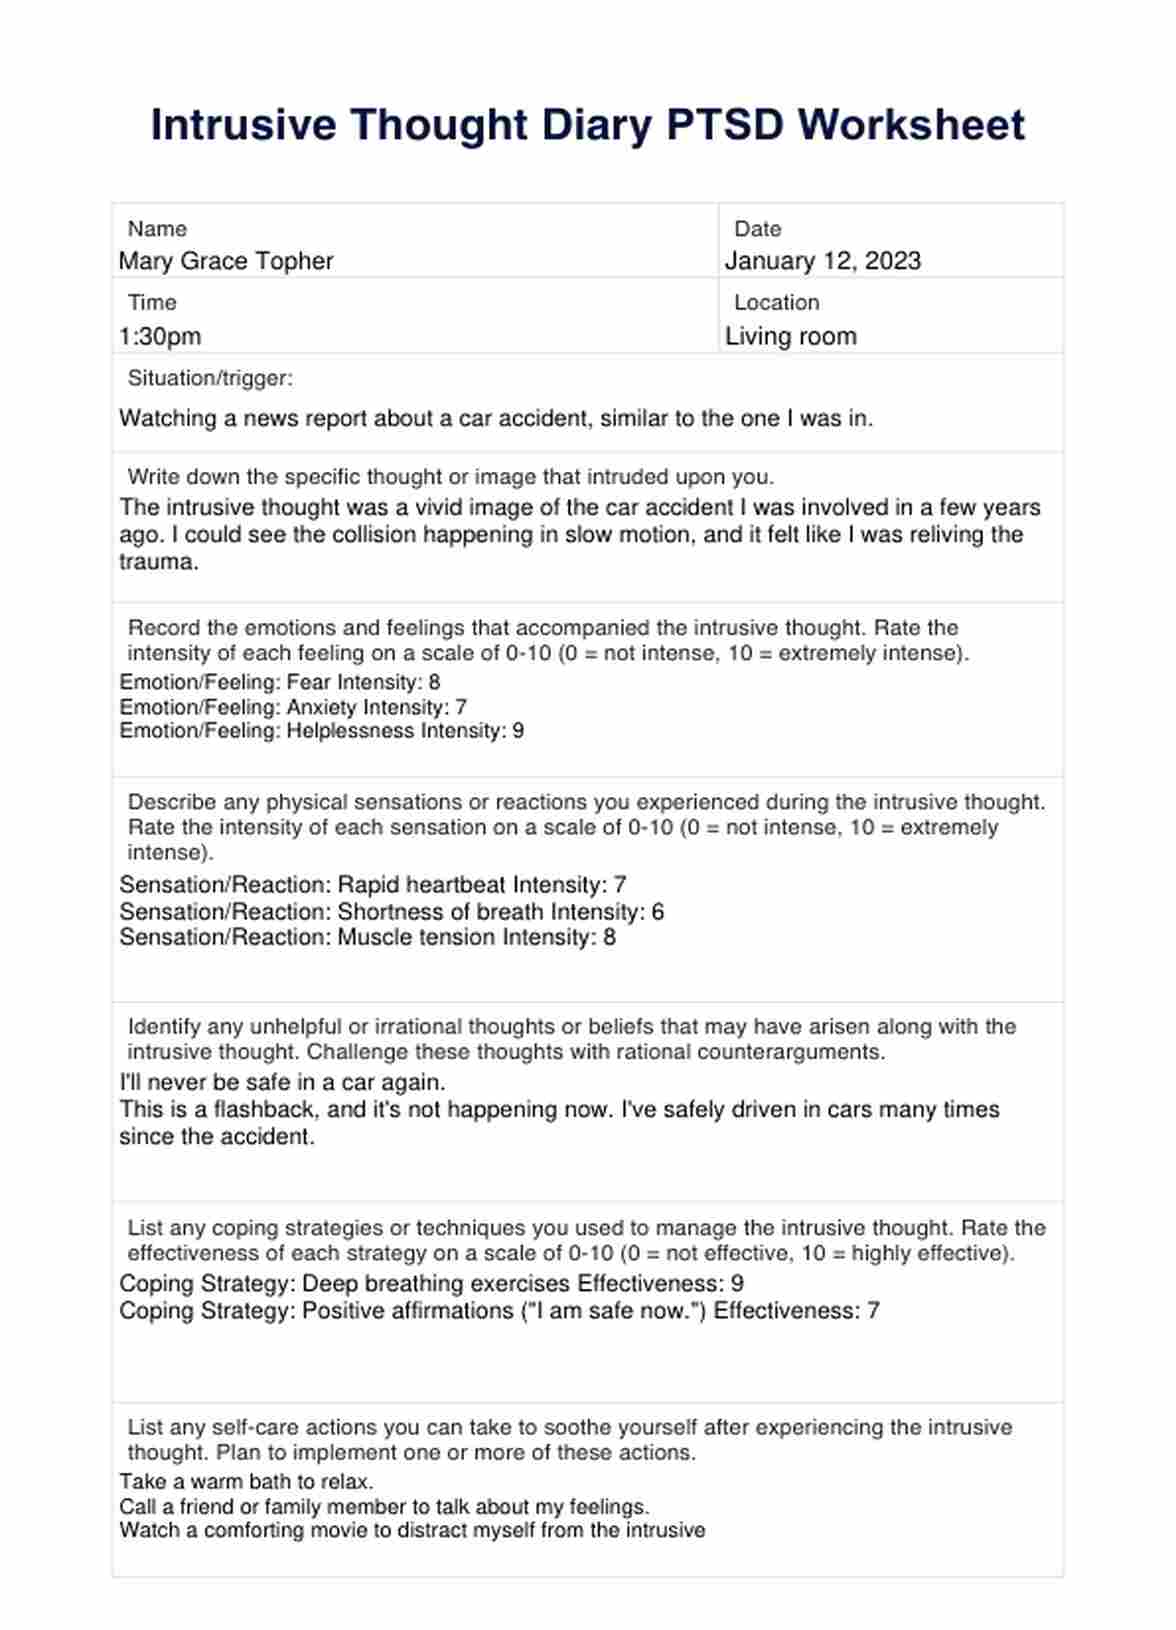 Intrusive Thought Diary PTSD Worksheets PDF Example